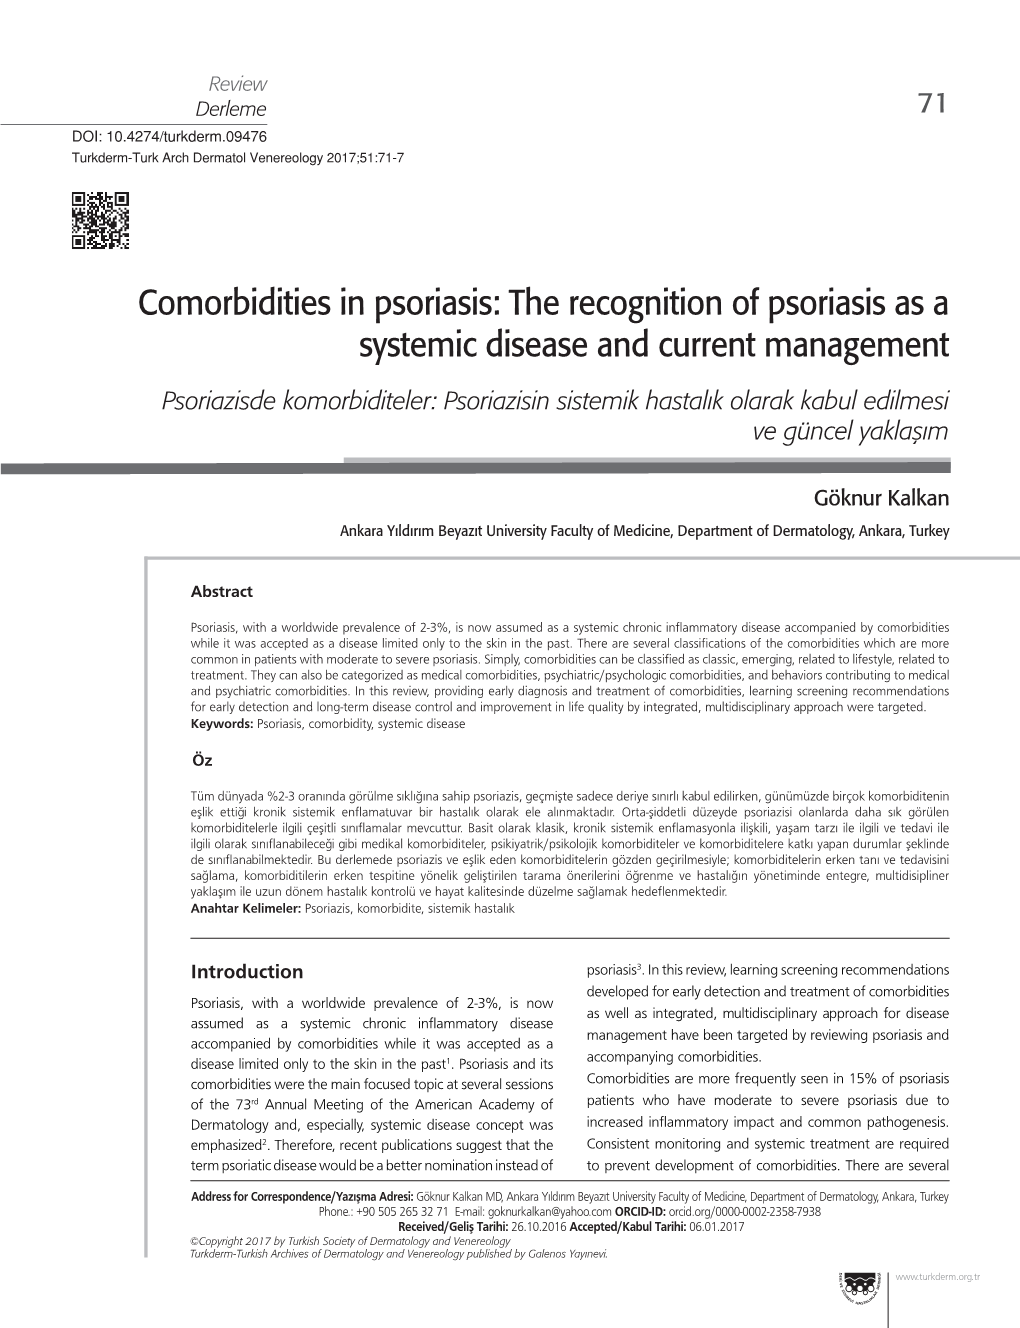 Comorbidities in Psoriasis: the Recognition of Psoriasis As a Systemic Disease and Current Management